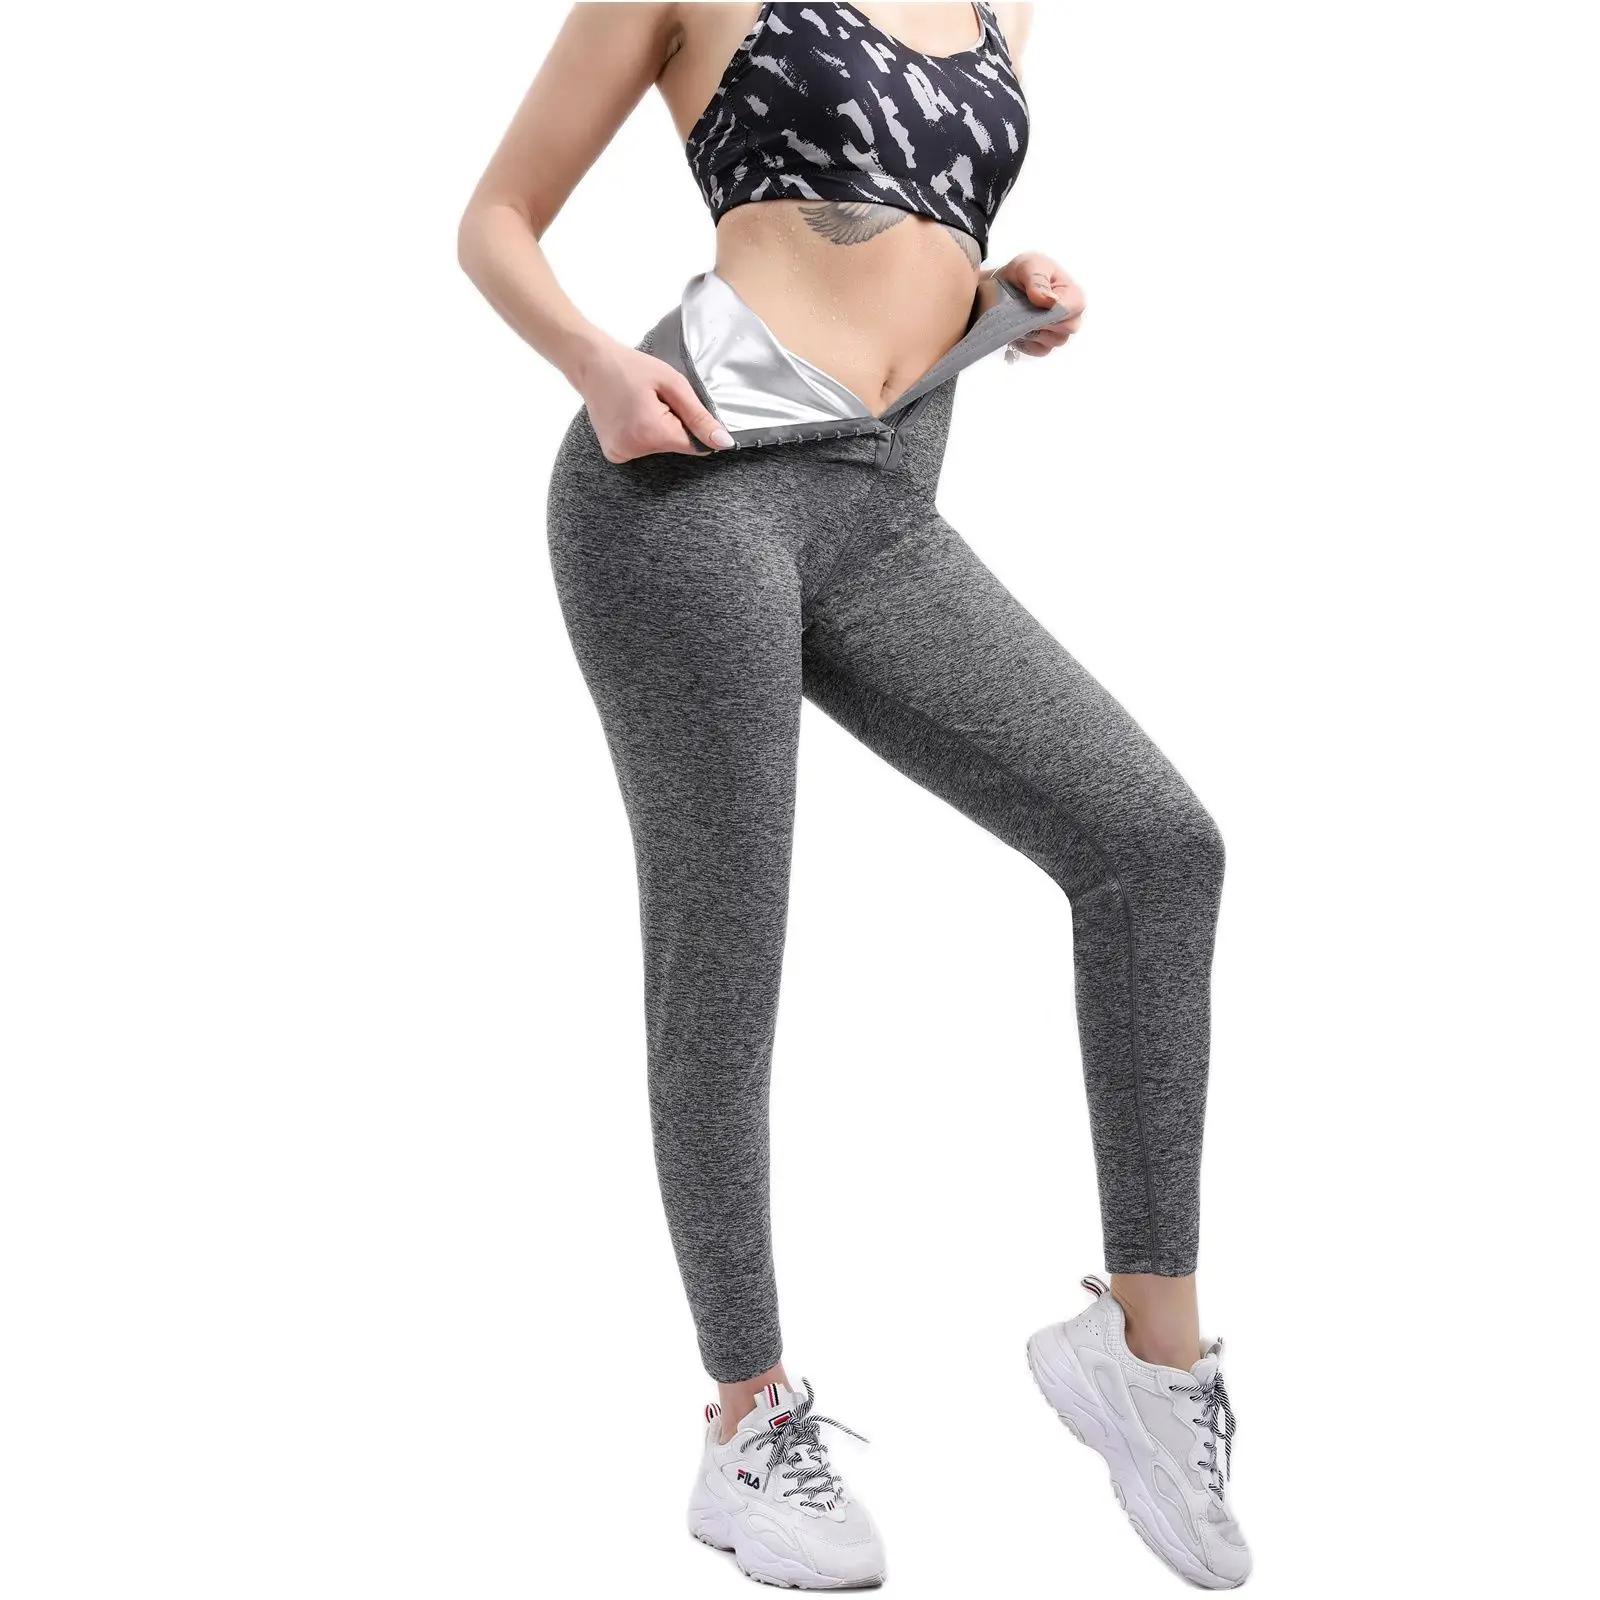 Body Shaper Sauna Slimming Pants Abdomen Reducer Hot Thermo Fat Burning  Sweat Capris Gym Fitness Workout Suit for Weight Loss